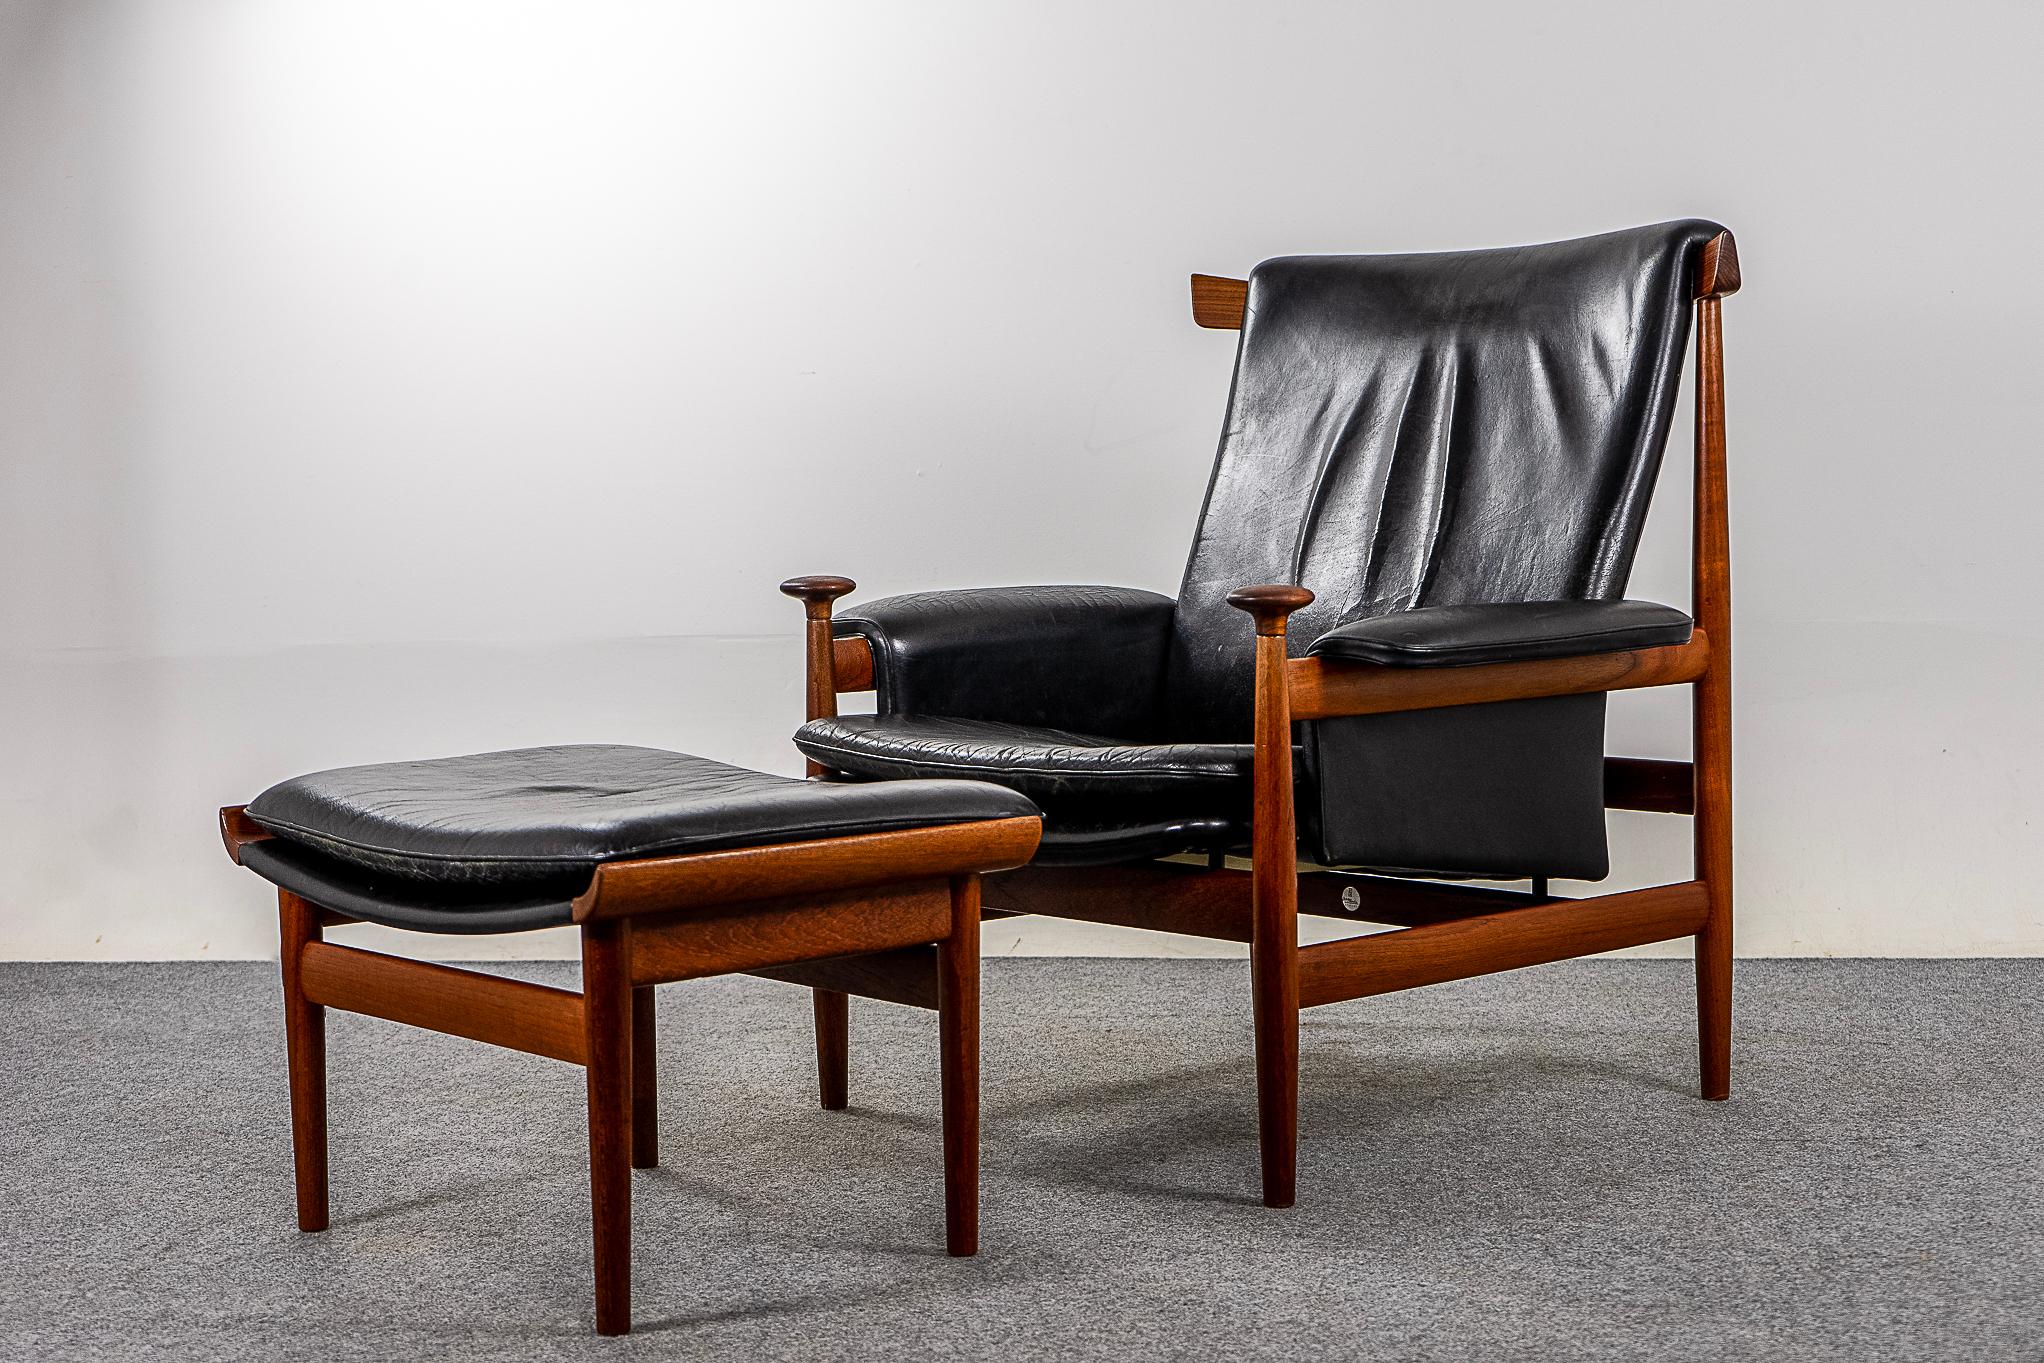 Teak and leather Bwana Model 152 lounge chair + footstool by Finn Juhl for France & Son, circa 1960's. Iconic lounger features a striking curved design with floating seat and distinctive pommel handrests. Generous proportions and ergonomic angles